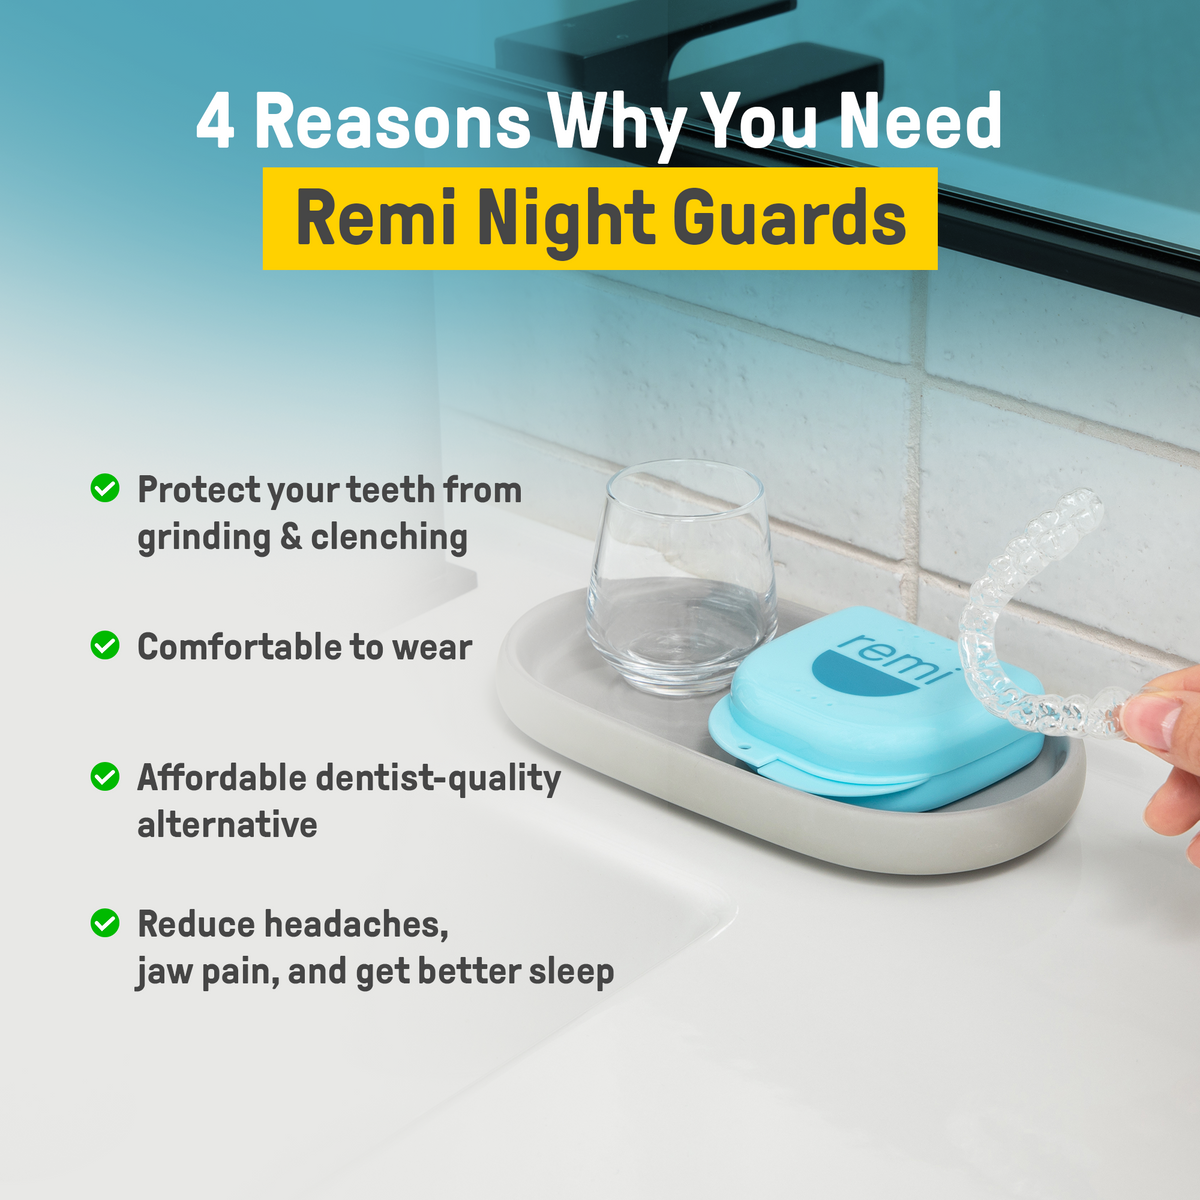 Advertisement for dental-grade quality custom night guards listing four benefits, displayed next to a bathroom sink with the guard and its container.